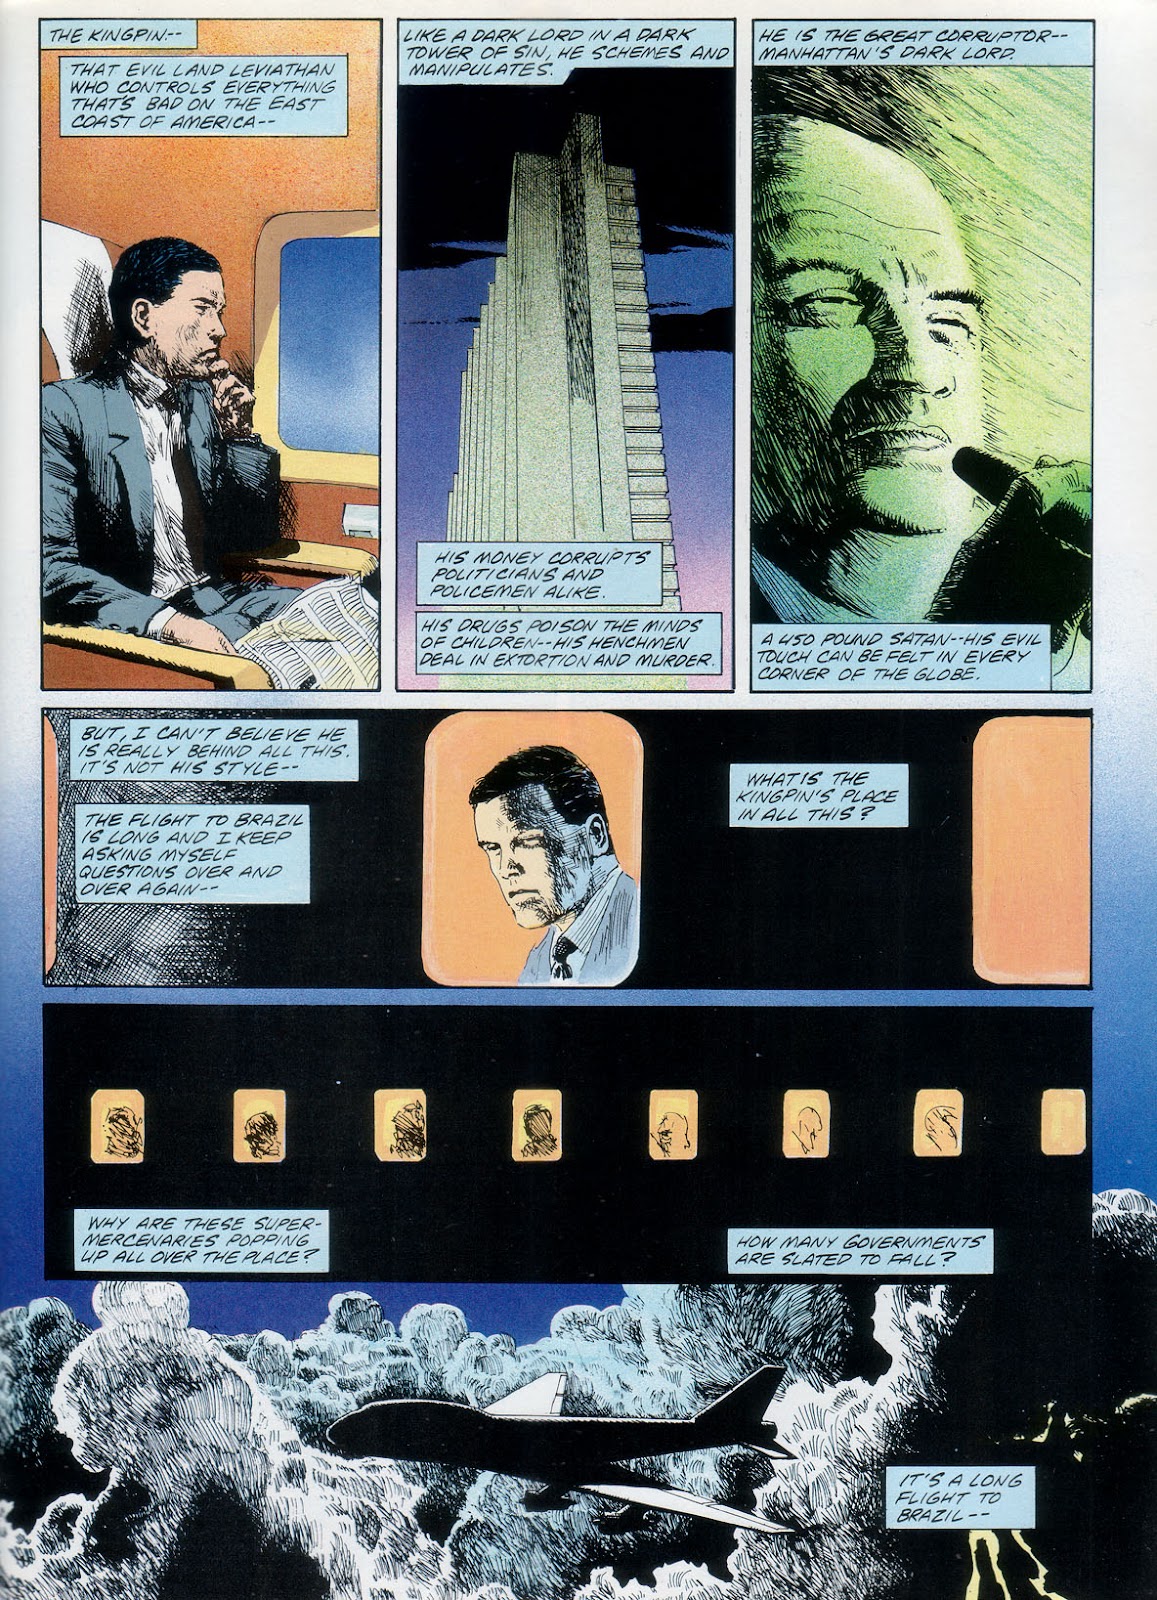 Marvel Graphic Novel issue 57 - Rick Mason - The Agent - Page 33